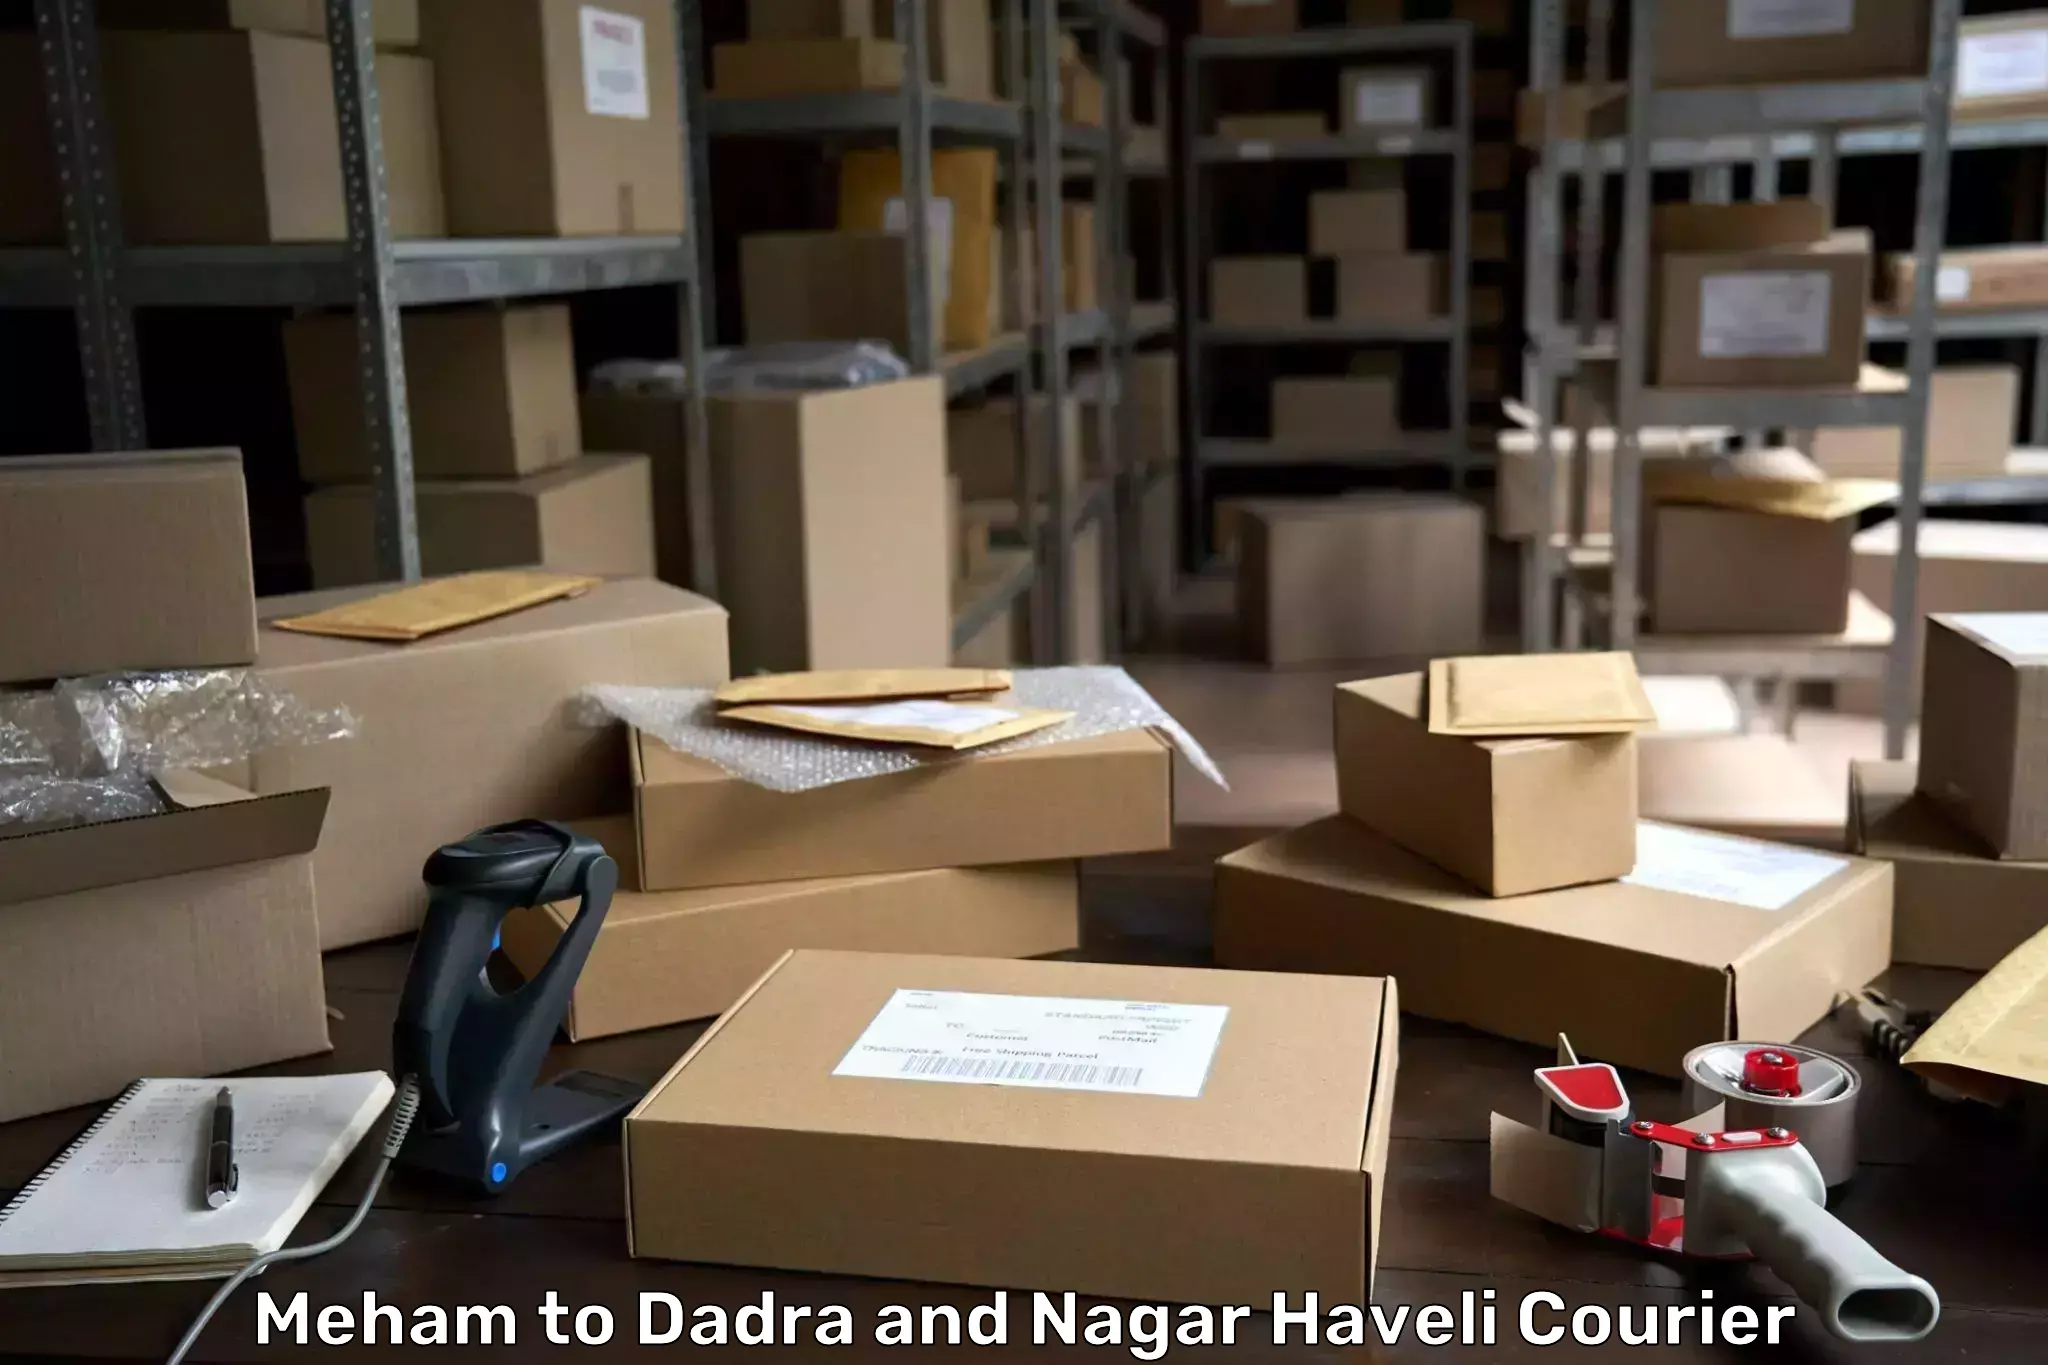 Weekend courier service Meham to Dadra and Nagar Haveli